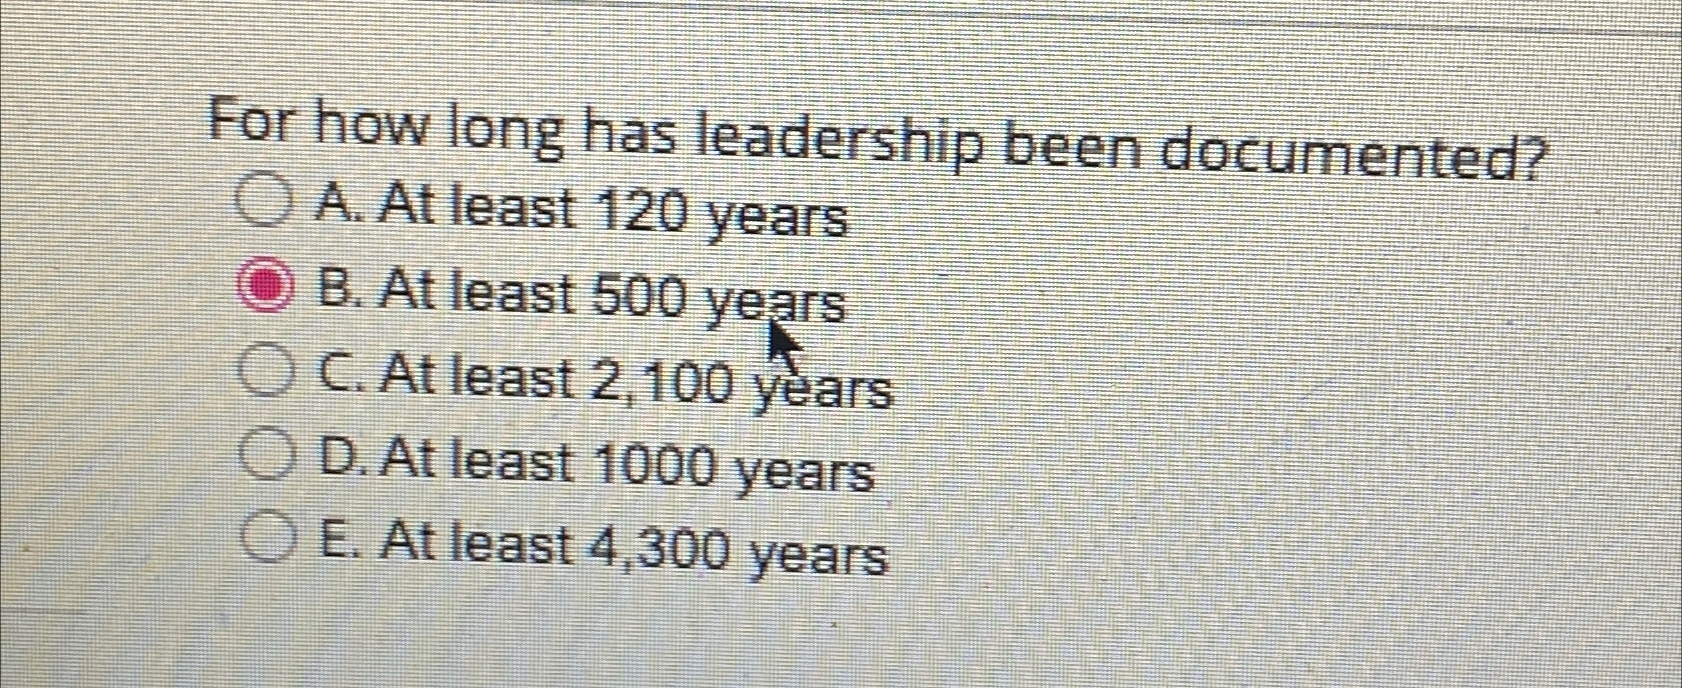 Long leader questions